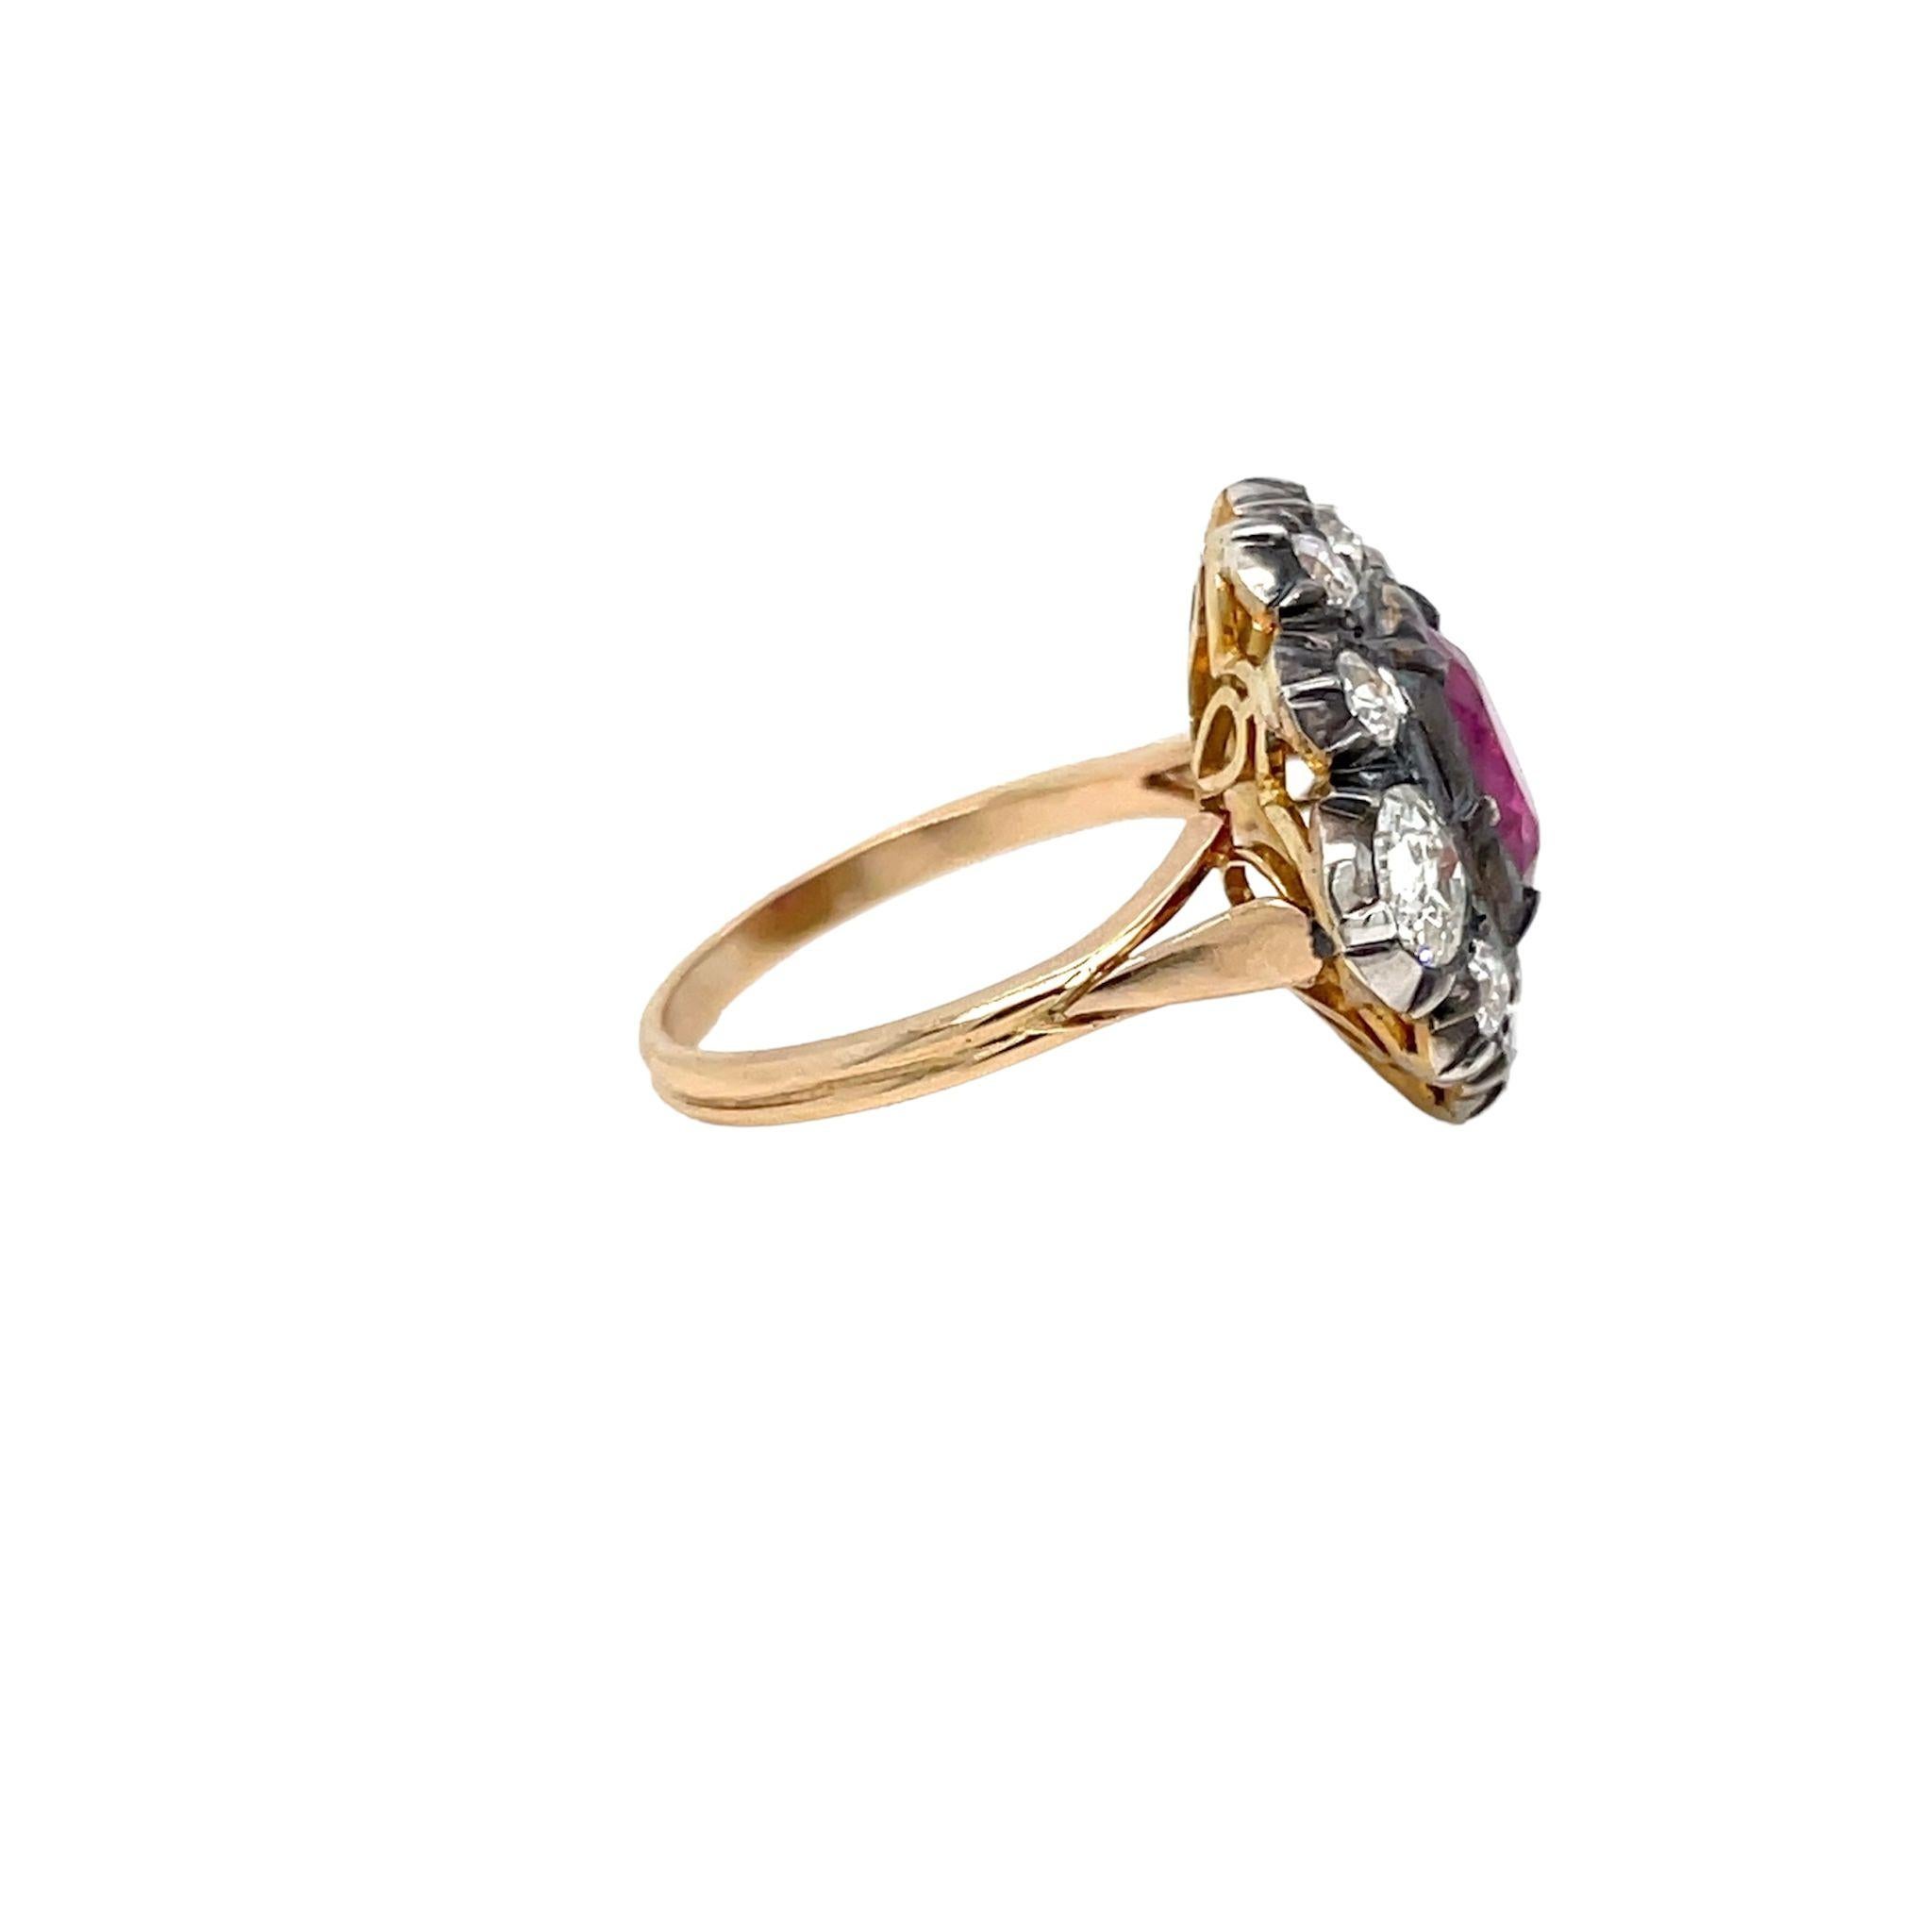 Antique 18Kt rose Gold and silver Ruby and Diamond ring.
The cluster style ring is centered with an approximately 2.05 carats stunning oval ruby, Thailand origin, accented by an halo of sparkling old mine cut diamonds weighing approx. 1.60 carats